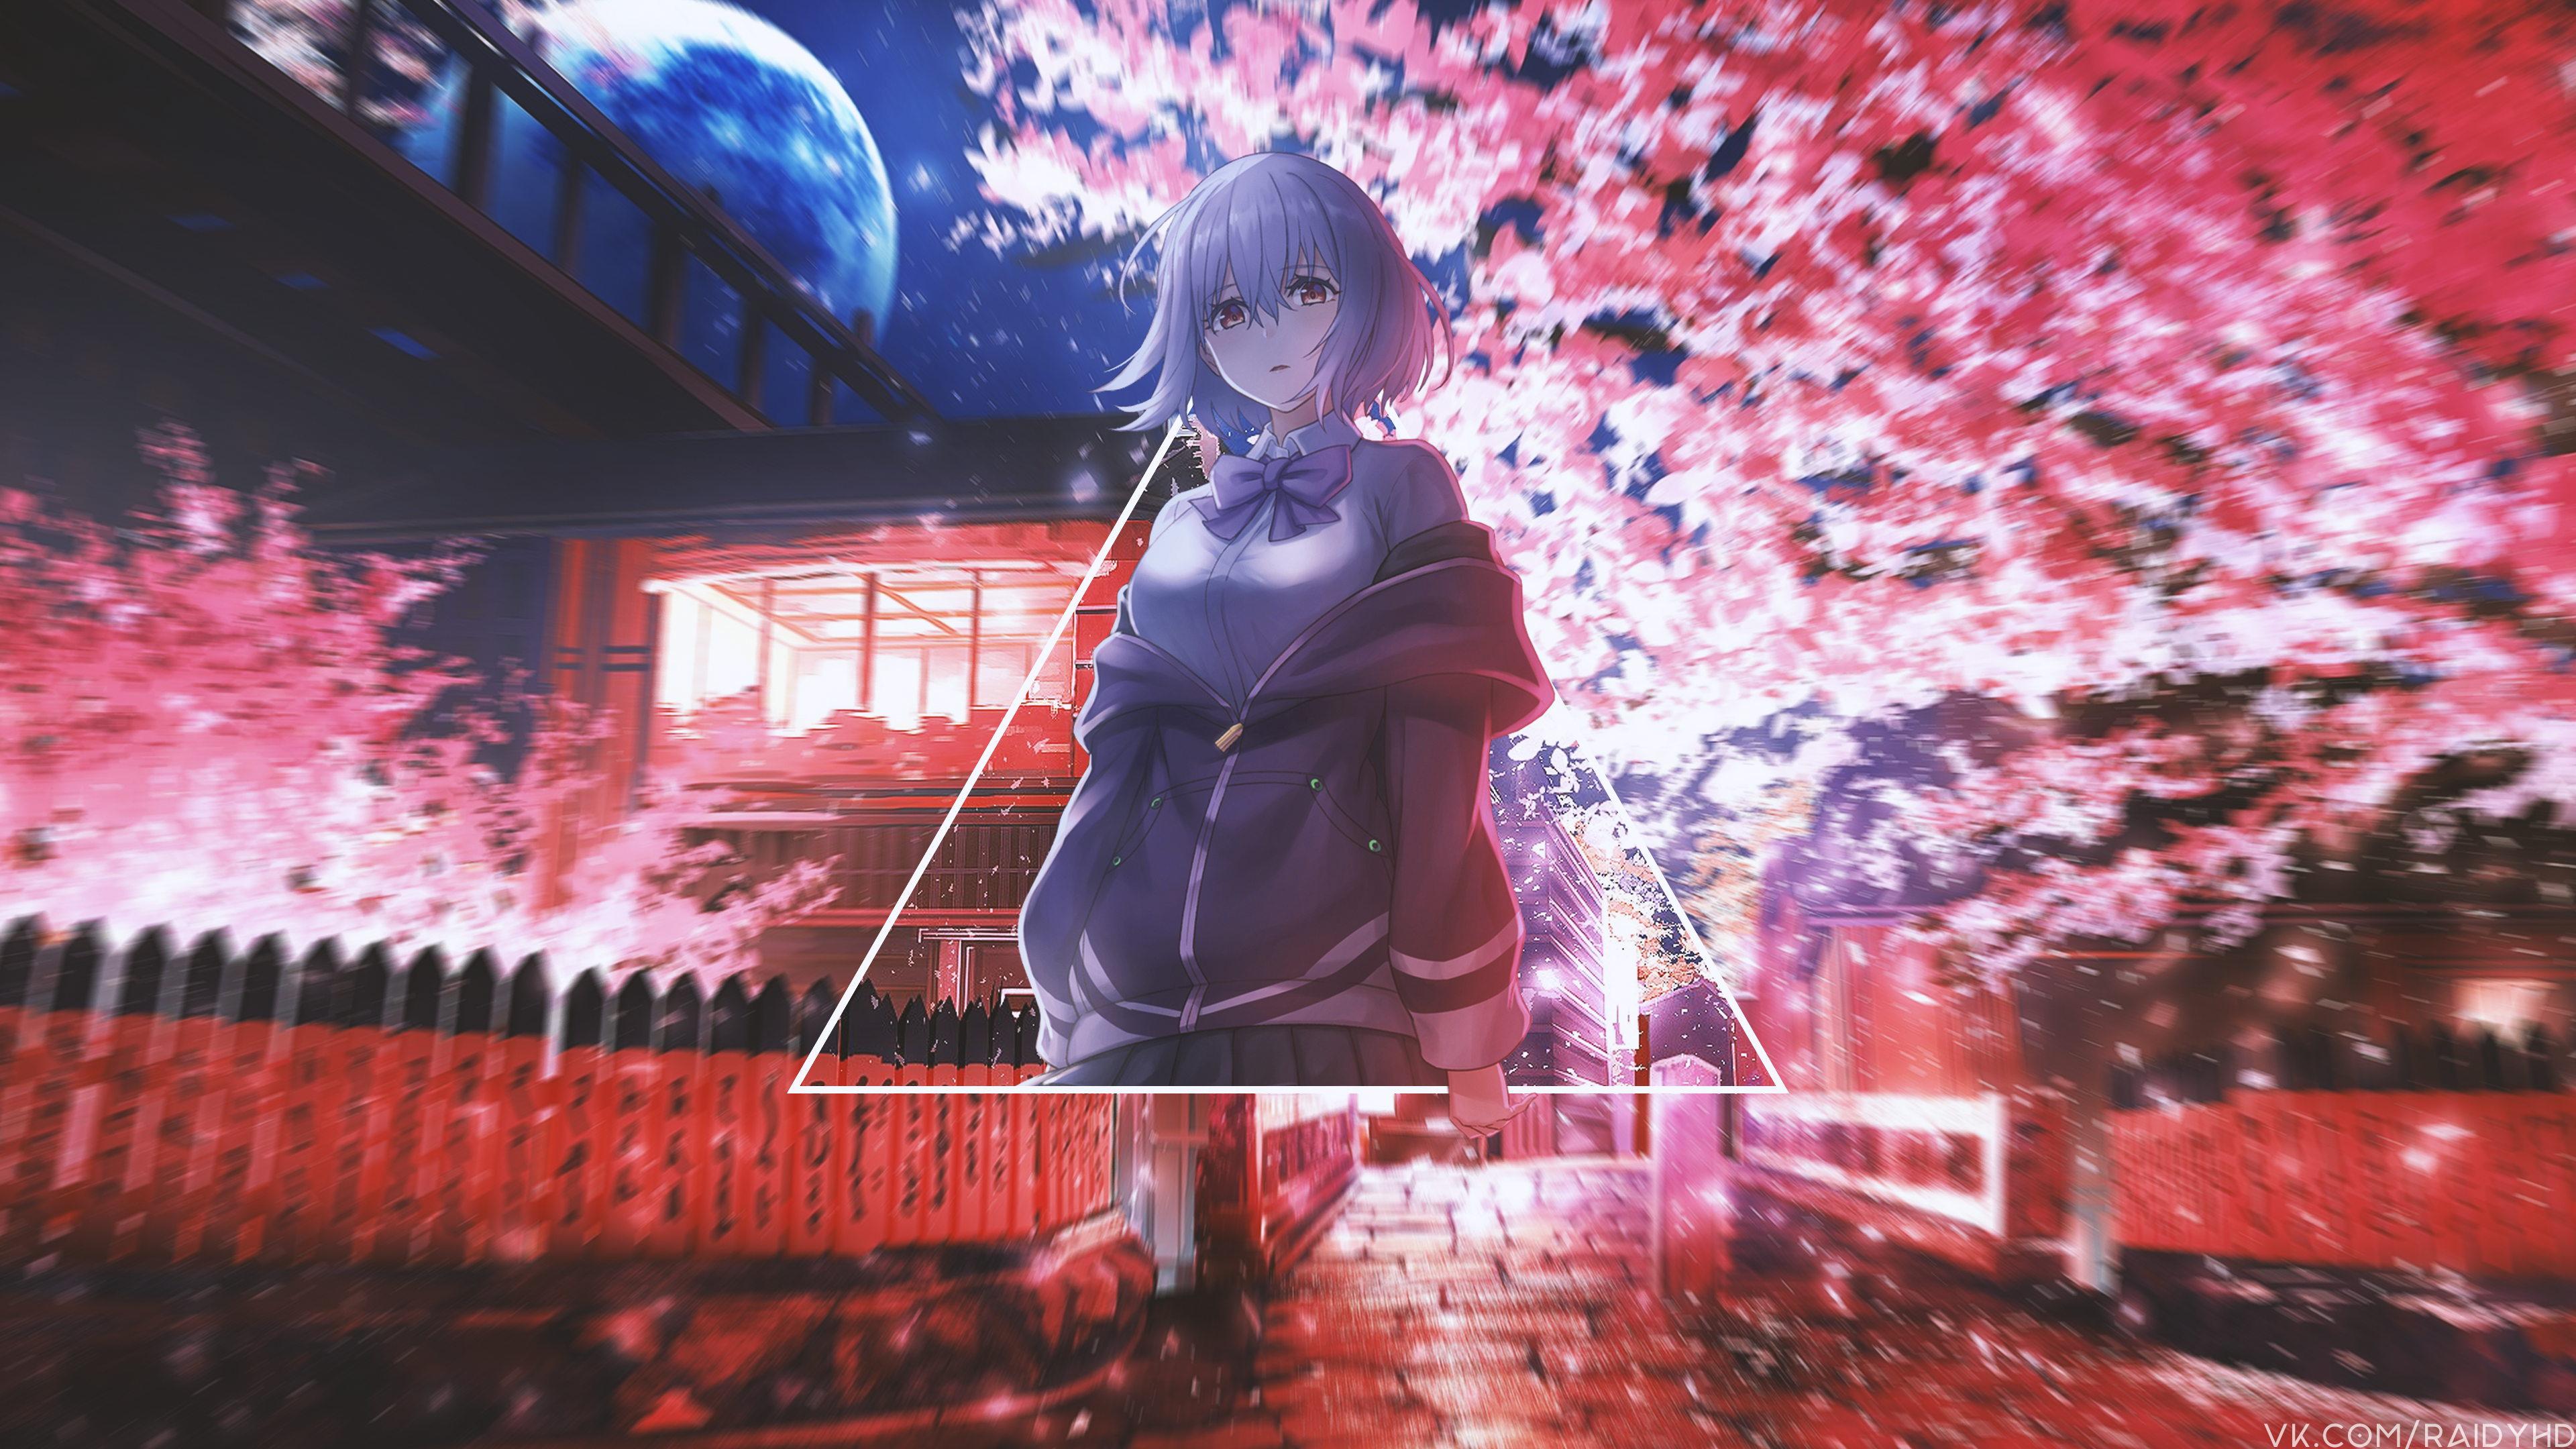 Anime 3840x2160 anime girls anime picture-in-picture cherry blossom SSSS.GRIDMAN